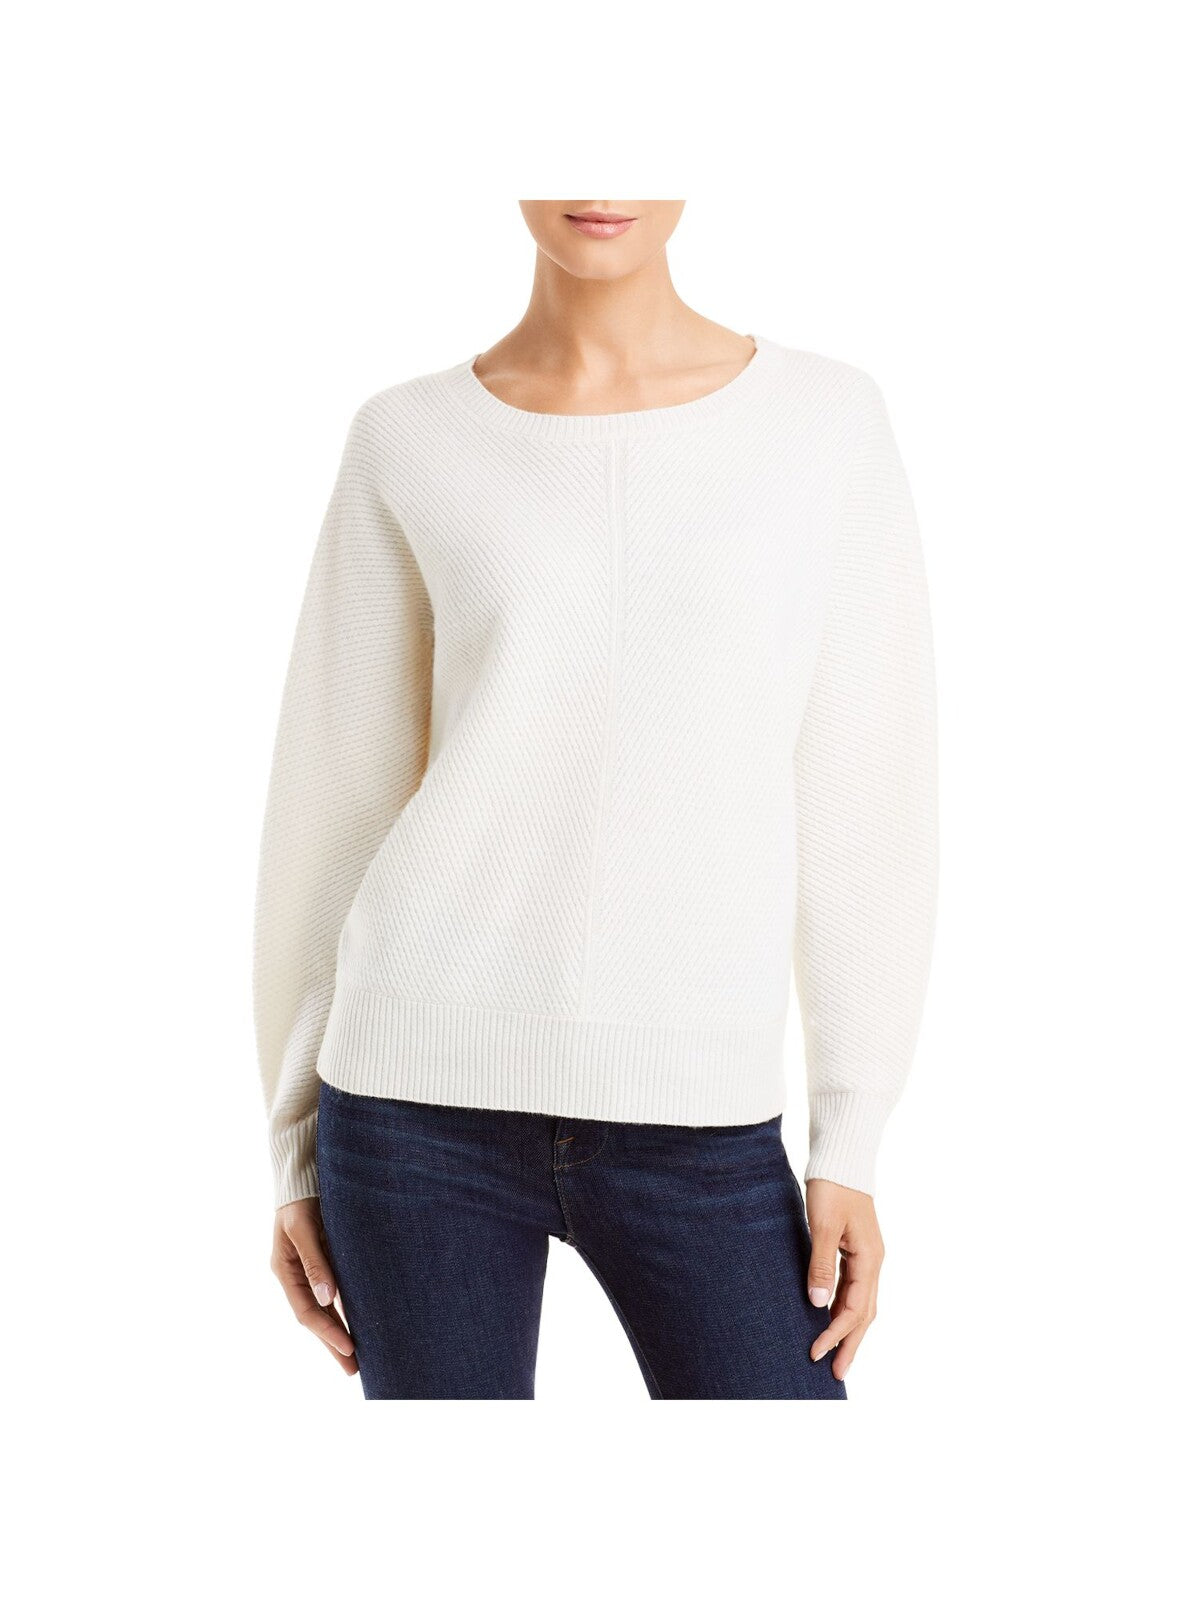 Designer Brand Womens Ivory Ribbed Textured Novelty Stitch Long Sleeve Scoop Neck Sweater M